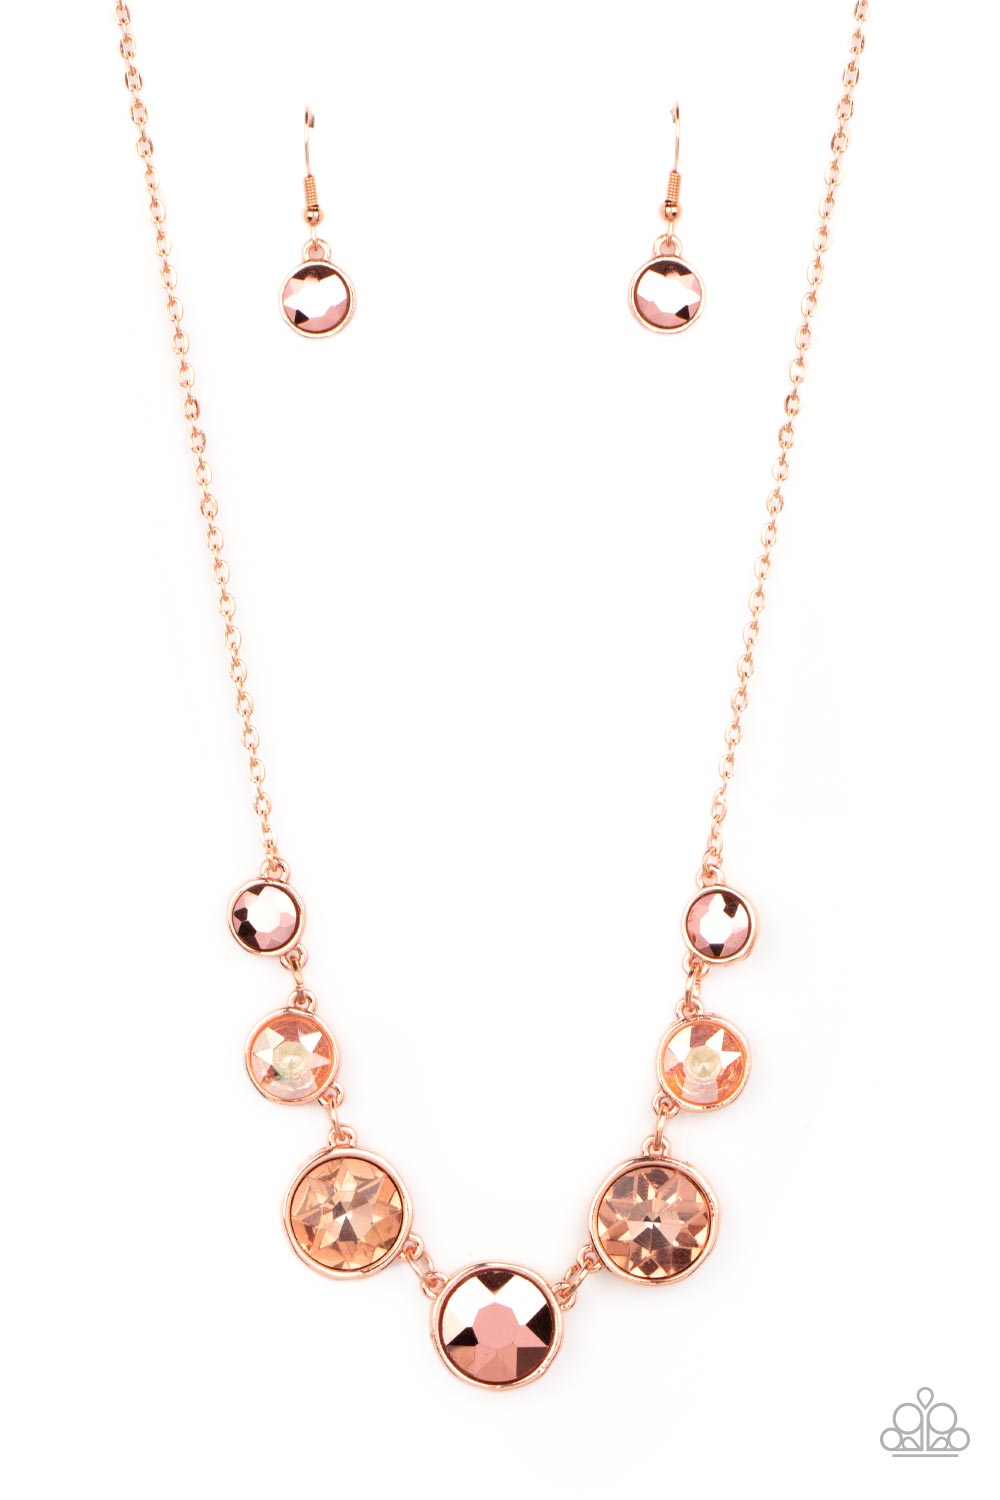 Pampered Powerhouse Necklace ( Pink, Copper, Multi)